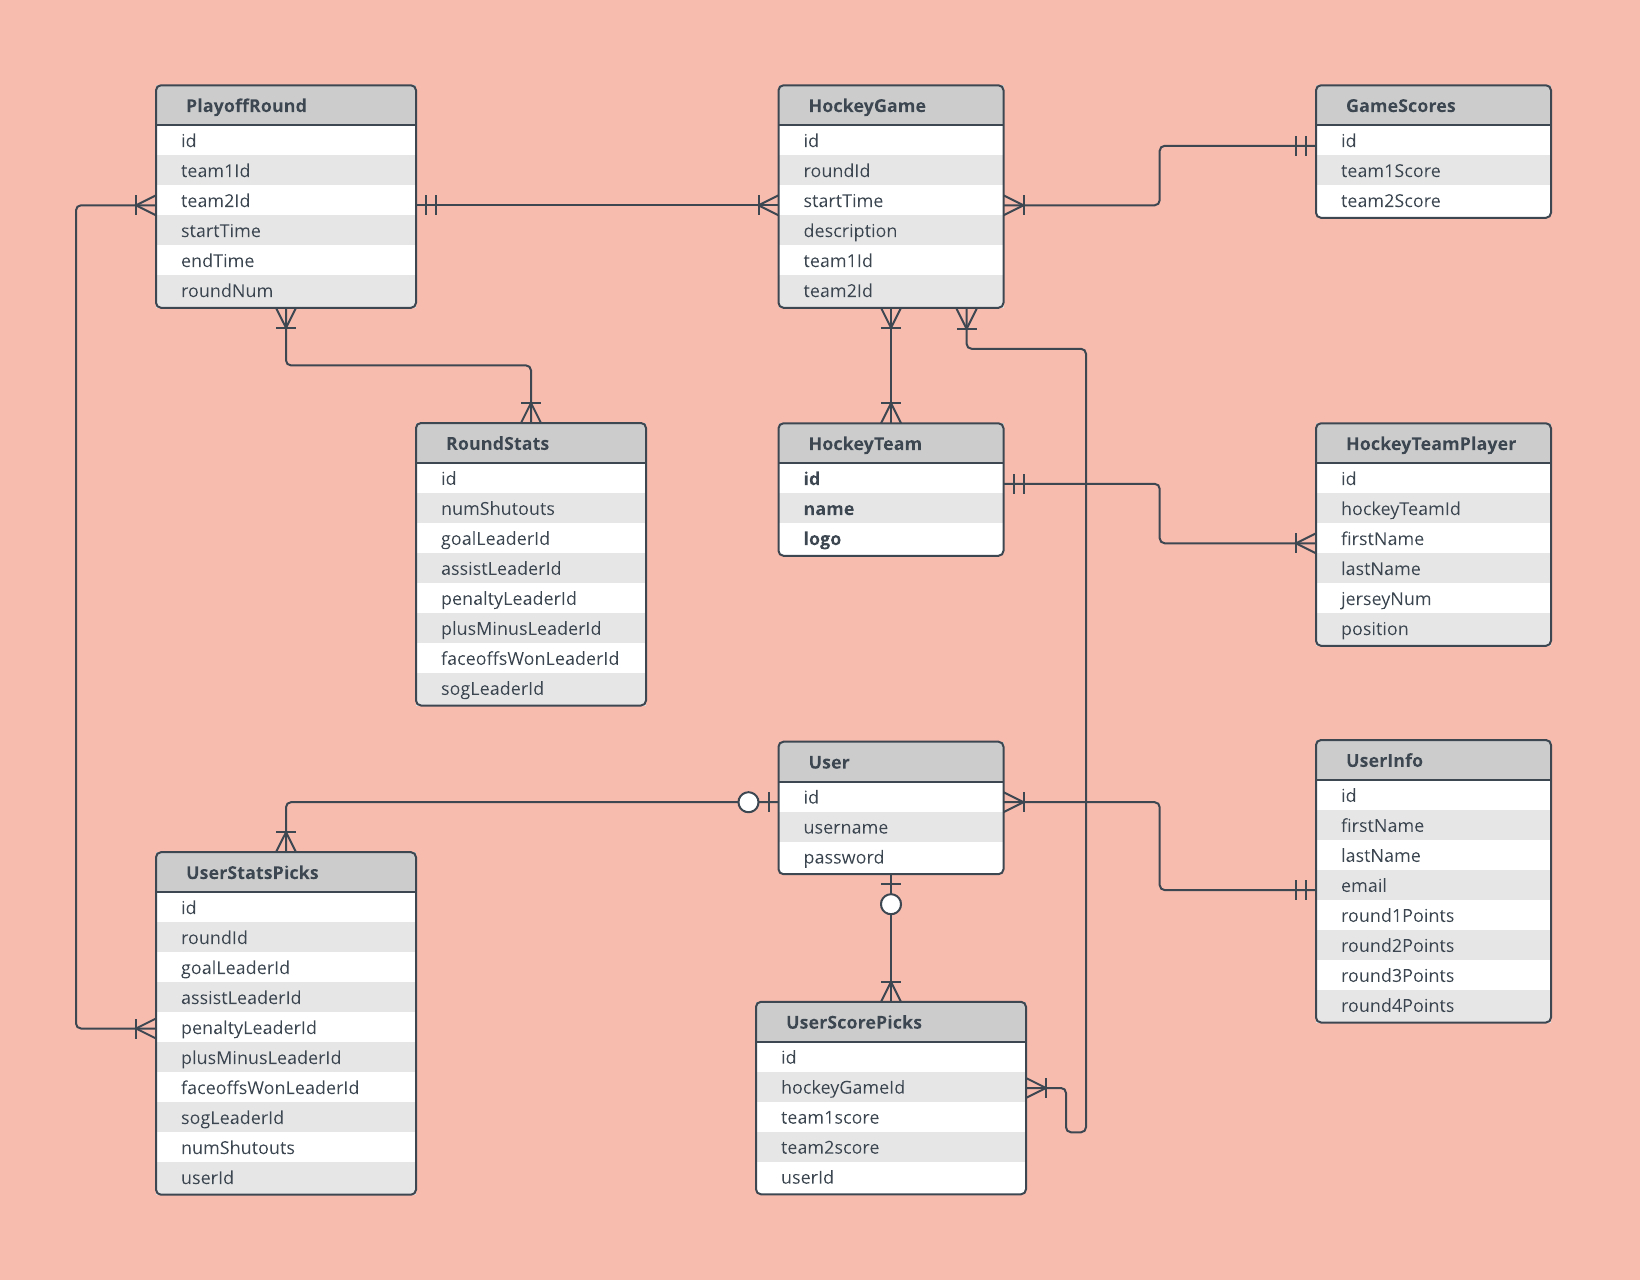 Er Diagram Examples And Templates | Lucidchart intended for Er Diagram Examples With Scenario